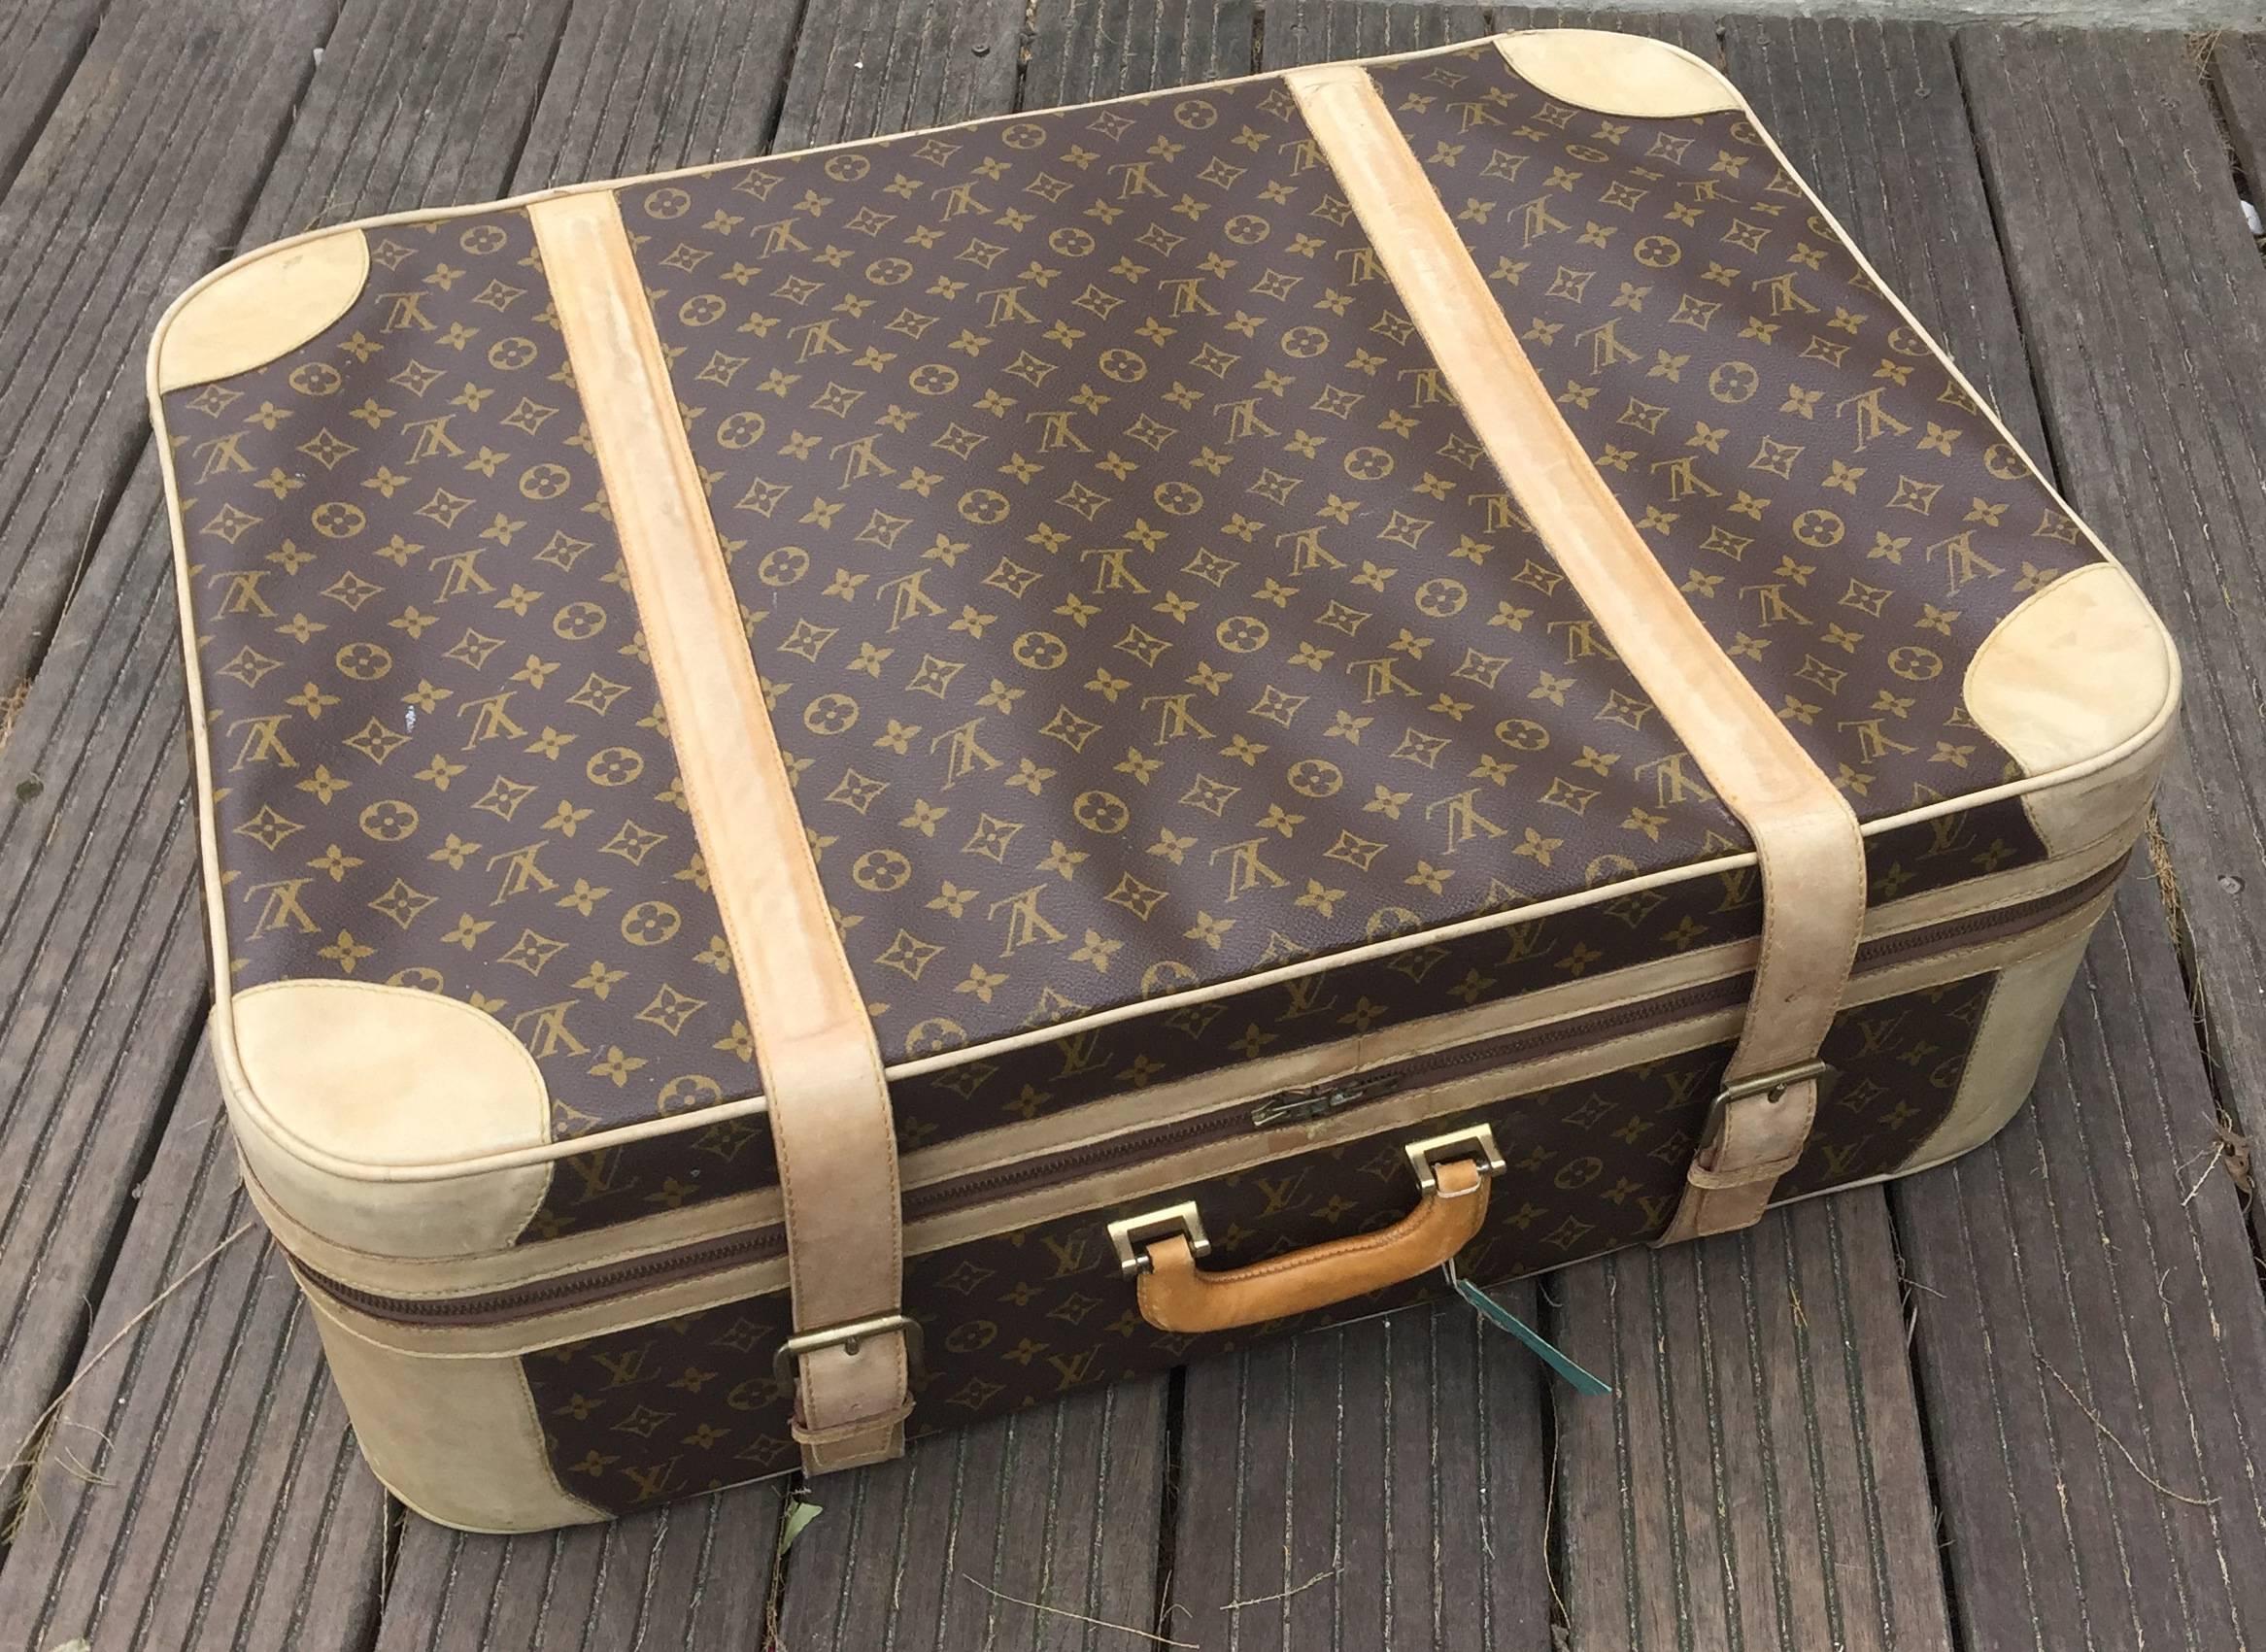 LOUIS VUITTON Monogram Stratos 70, large size travel luggage.
This stylish soft suitcase is finely crafted of Louis Vuitton monogram on toile canvas. 
This suitcase  features vachetta cowhide leather trim and rolled leather top handles with